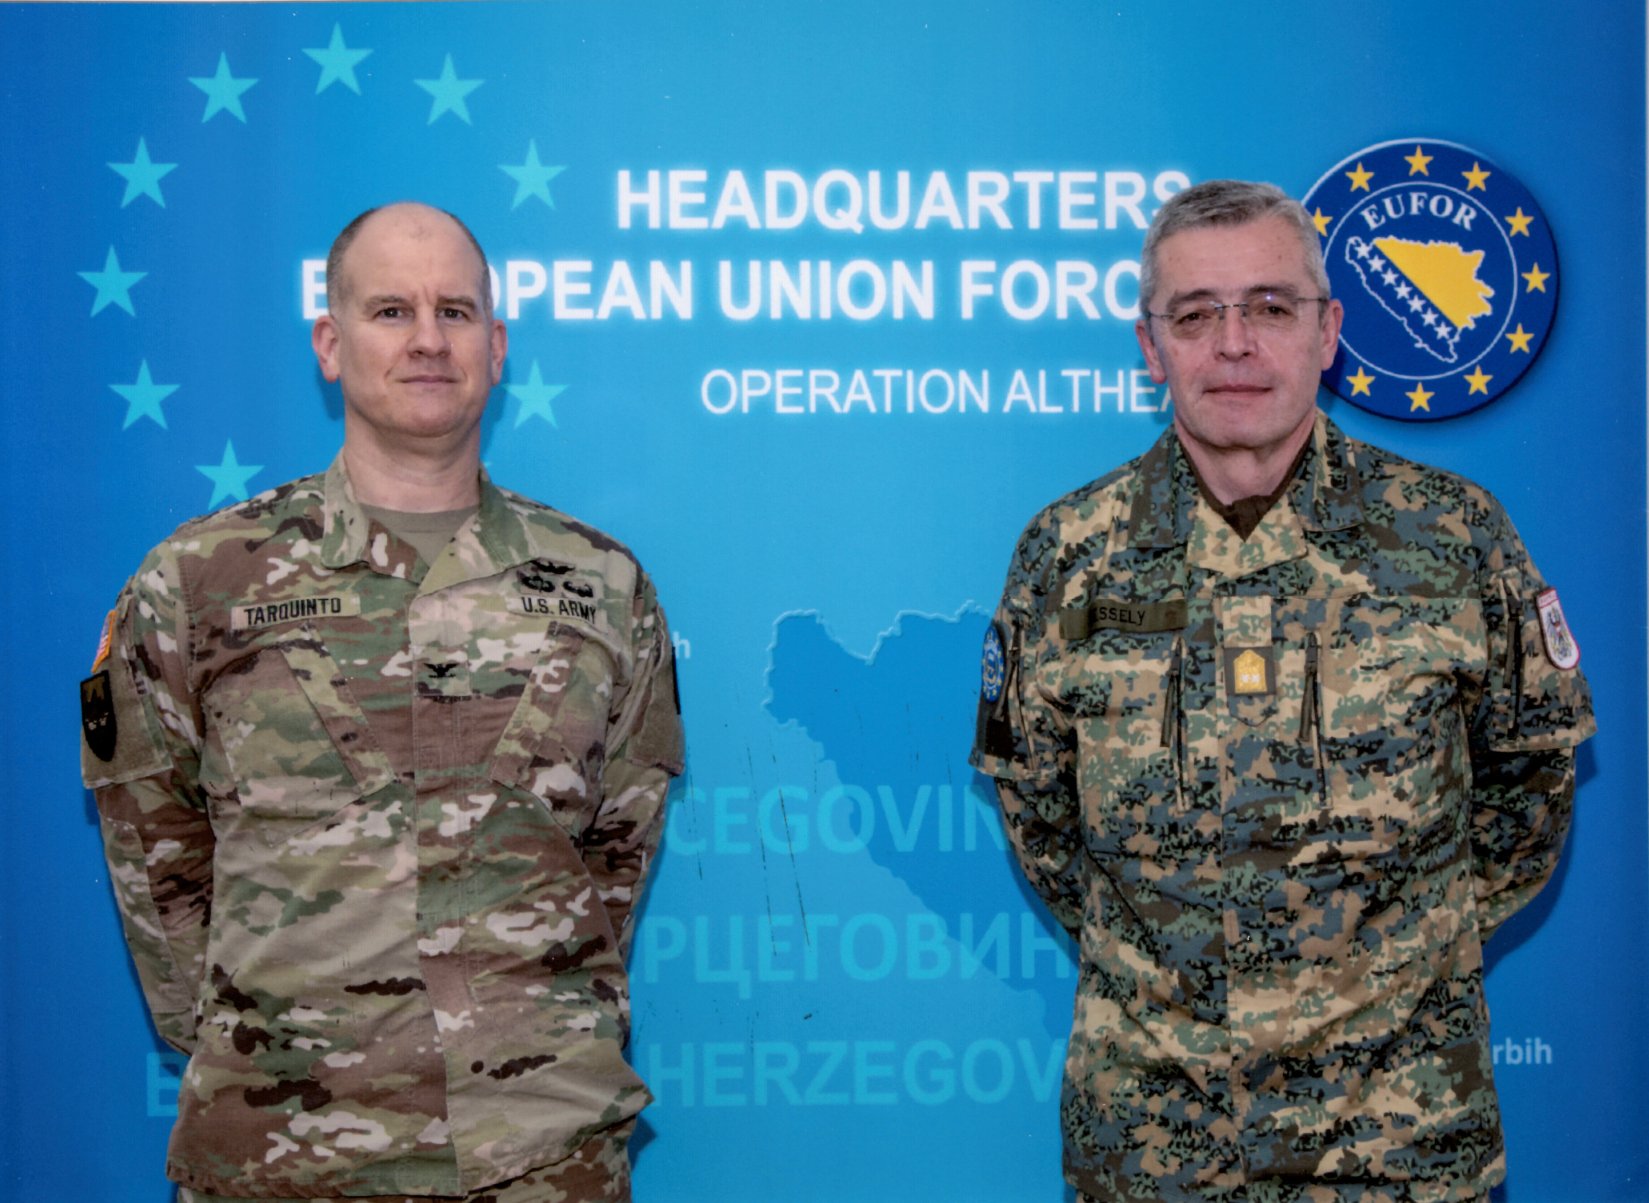 US Embassy Sarajevo on Twitter: "Colonel Michael Tarquinto, the U.S. Defense Attaché, met today with Major General Anton Wessely, Commander @euforbih, to discuss the security situation in Bosnia-Herzegovina, support to the Armed